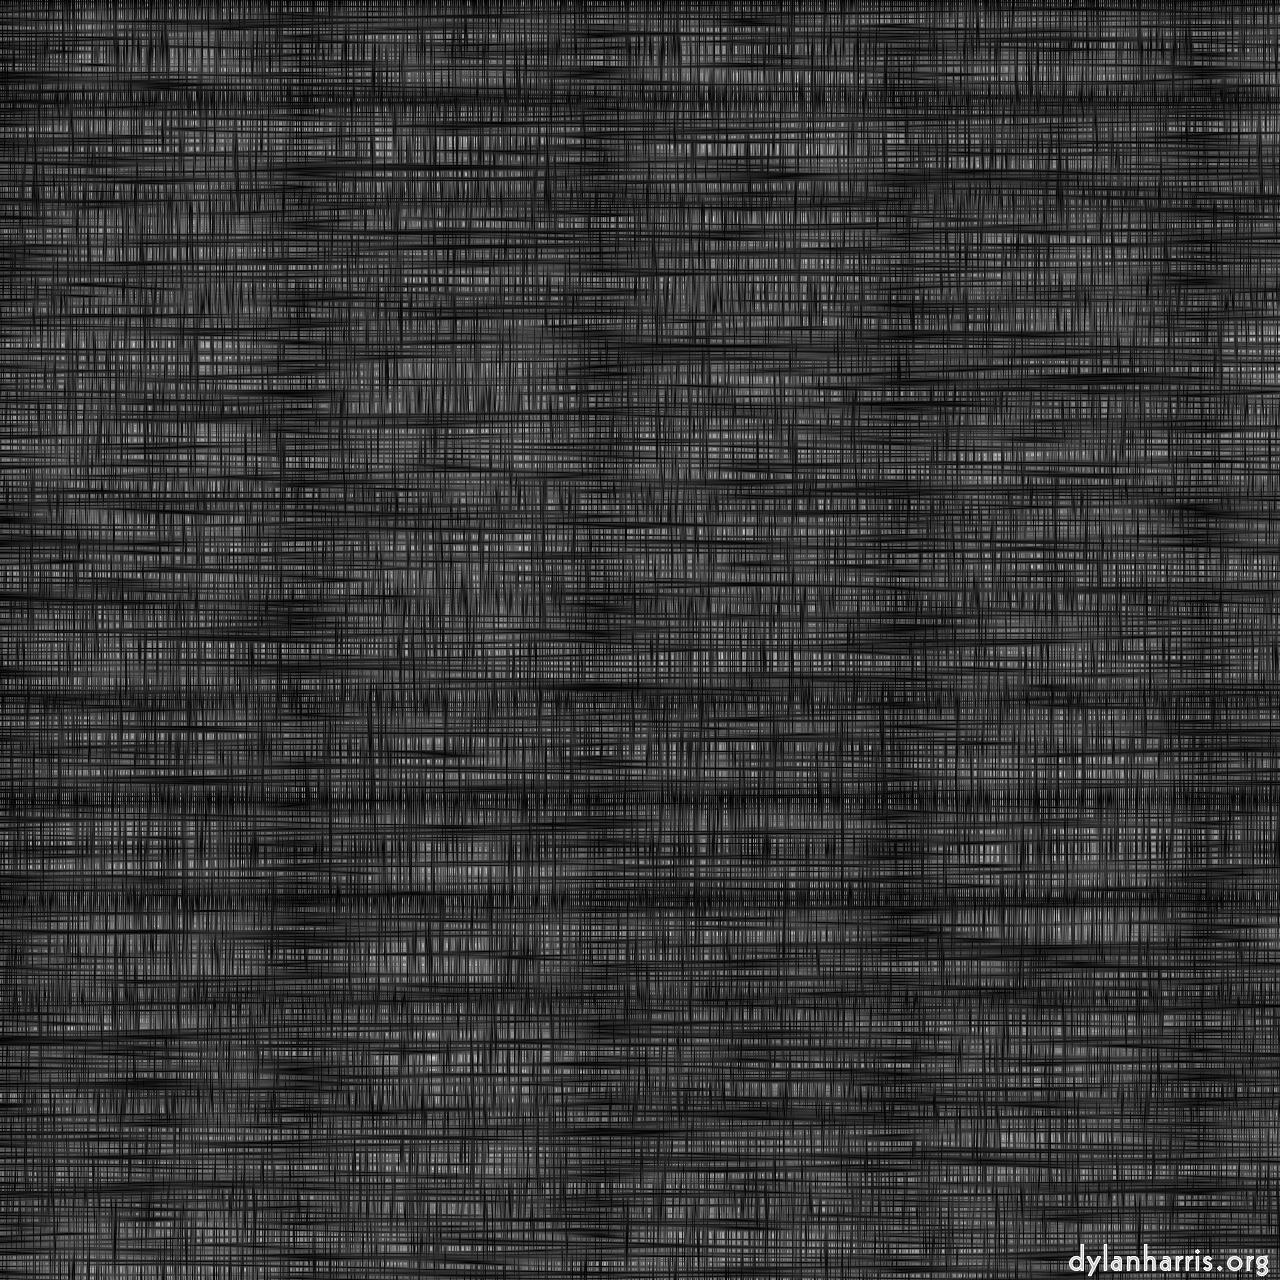 image: non-rep generative and abstract :: thatch bw